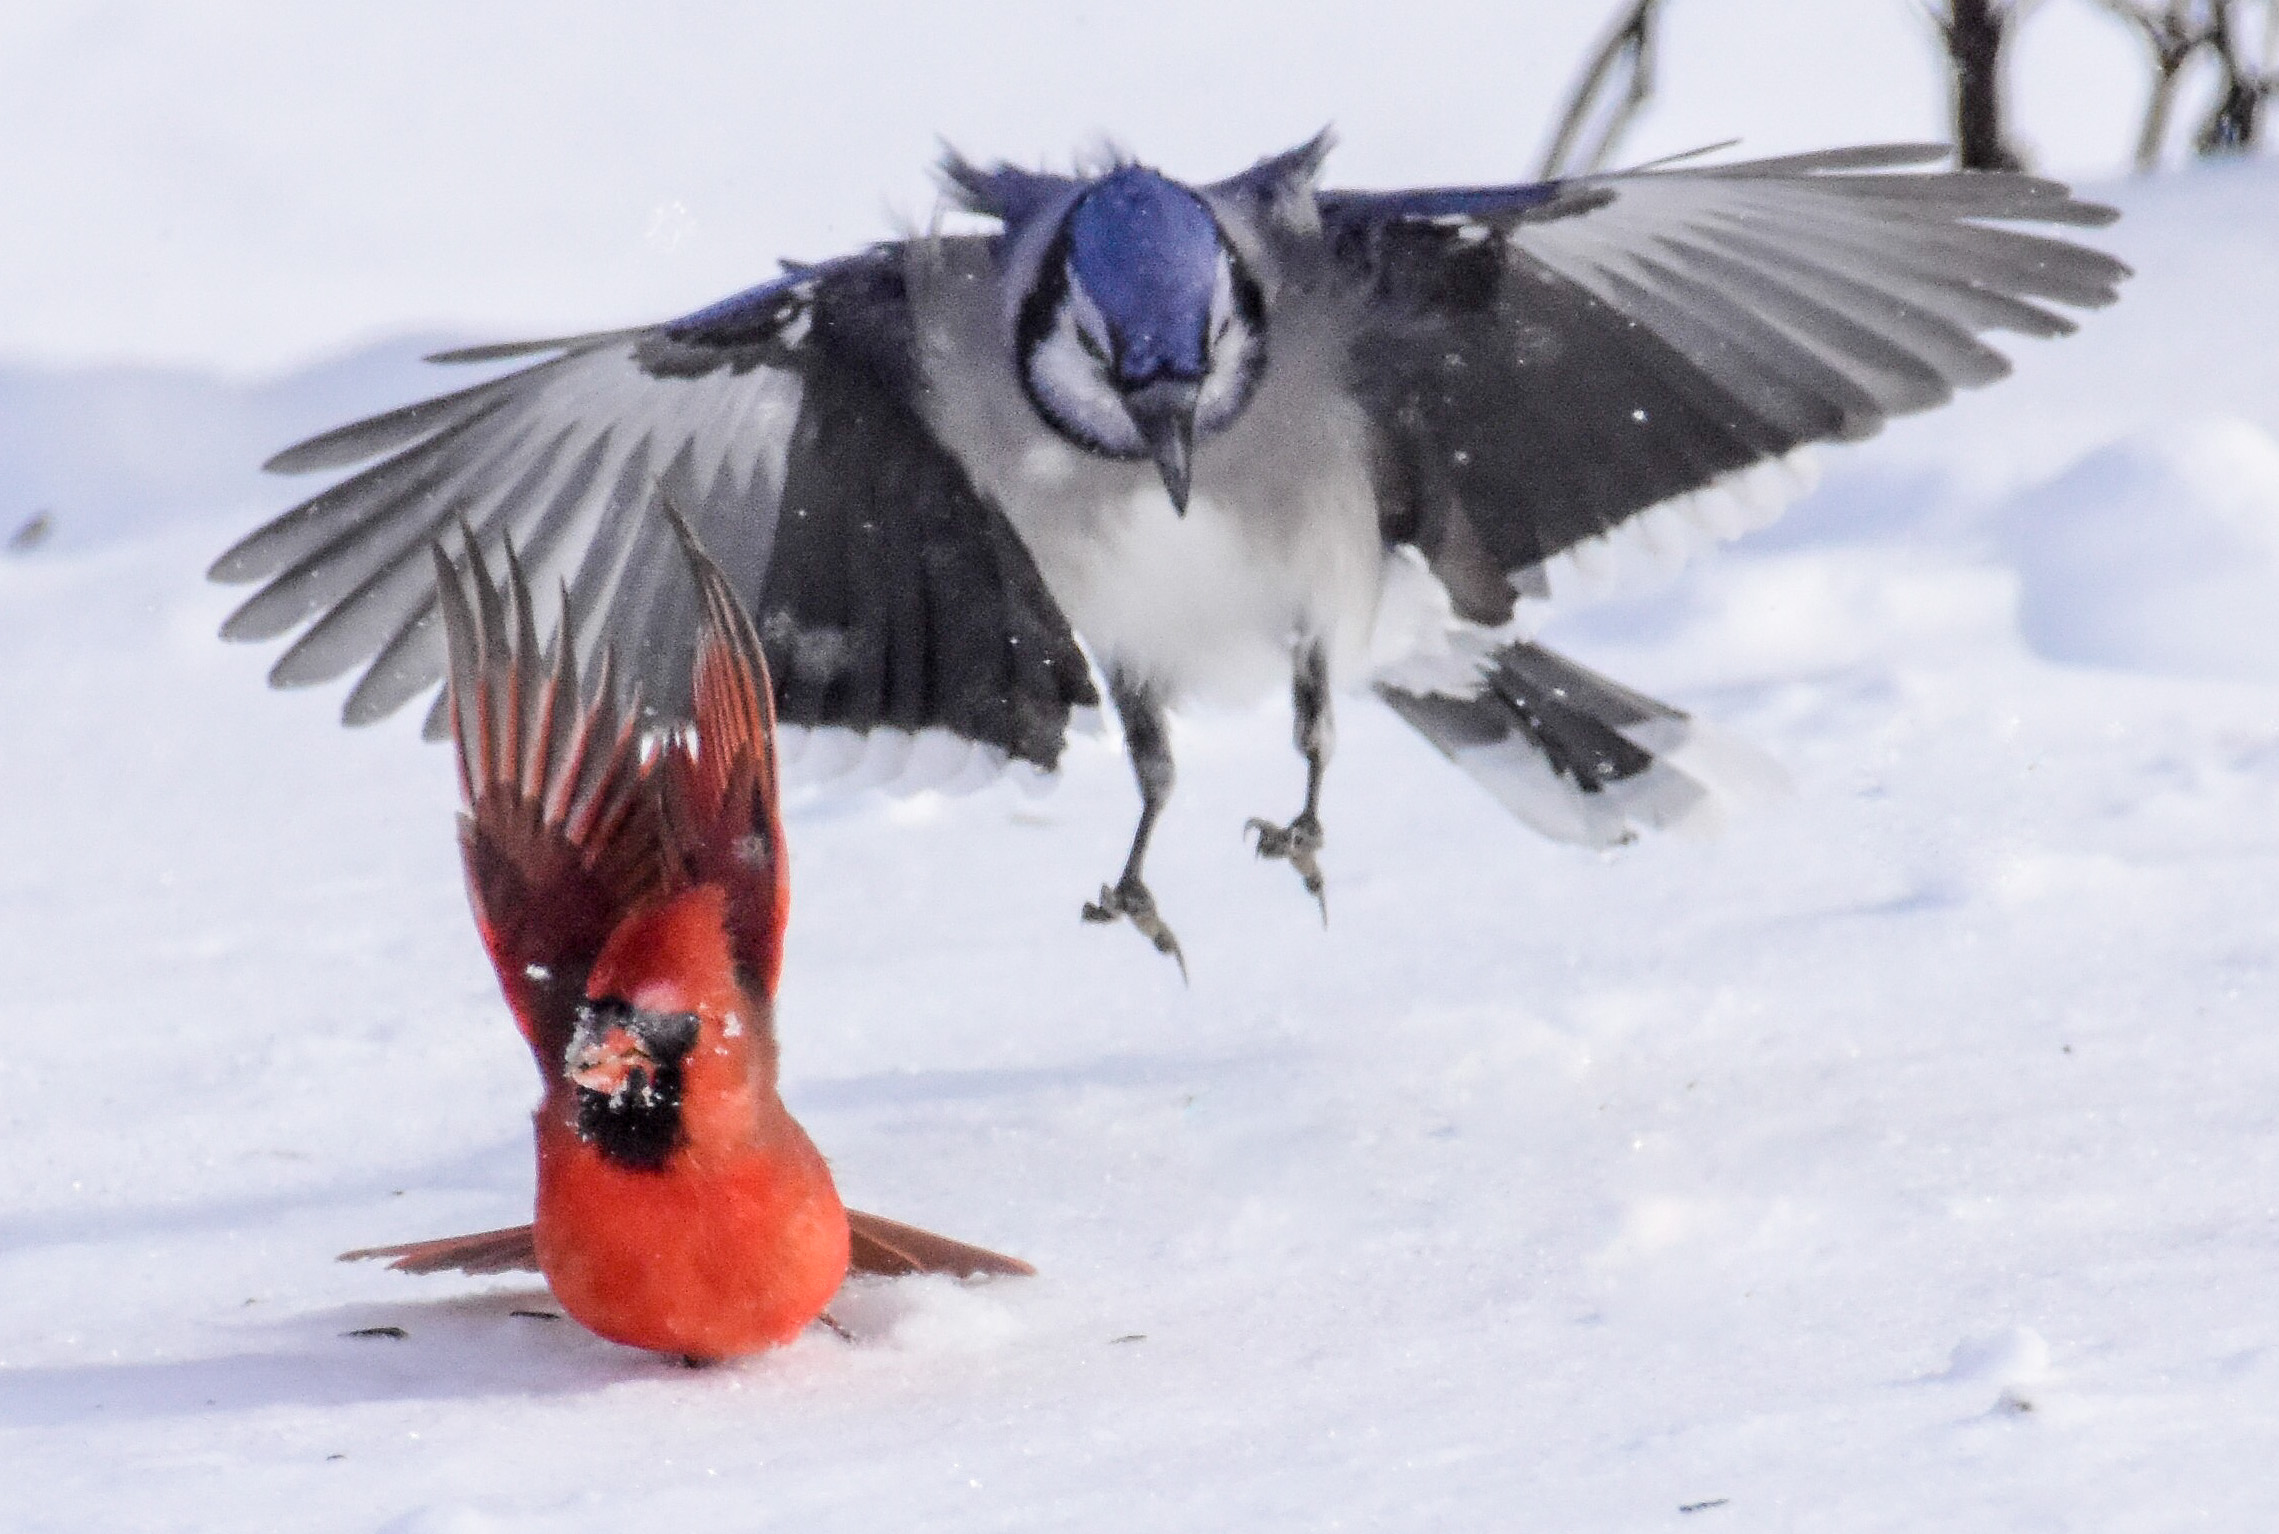 Male Cardinal and Blue Jay Landing on Snowy Ground